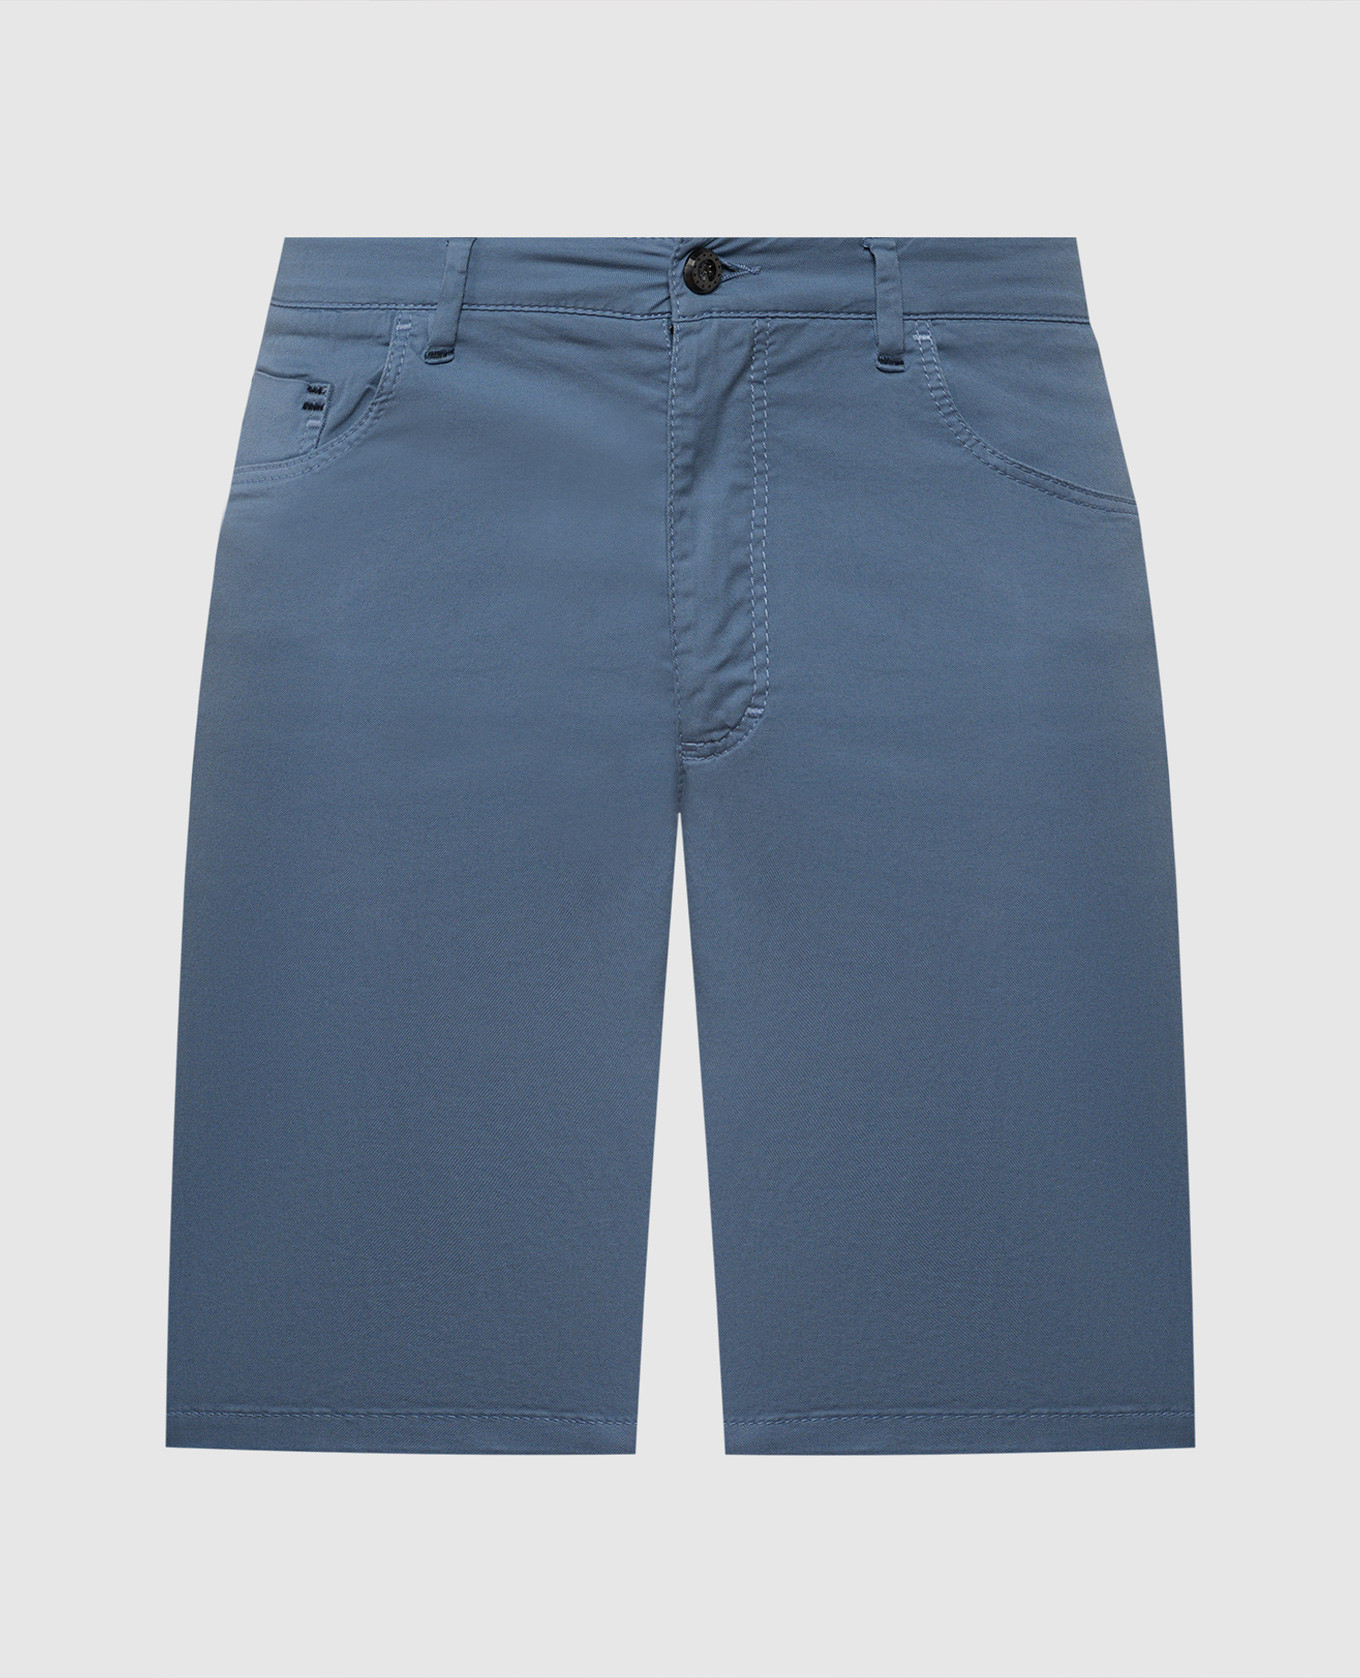 Blue shorts with embroidered logo emblem